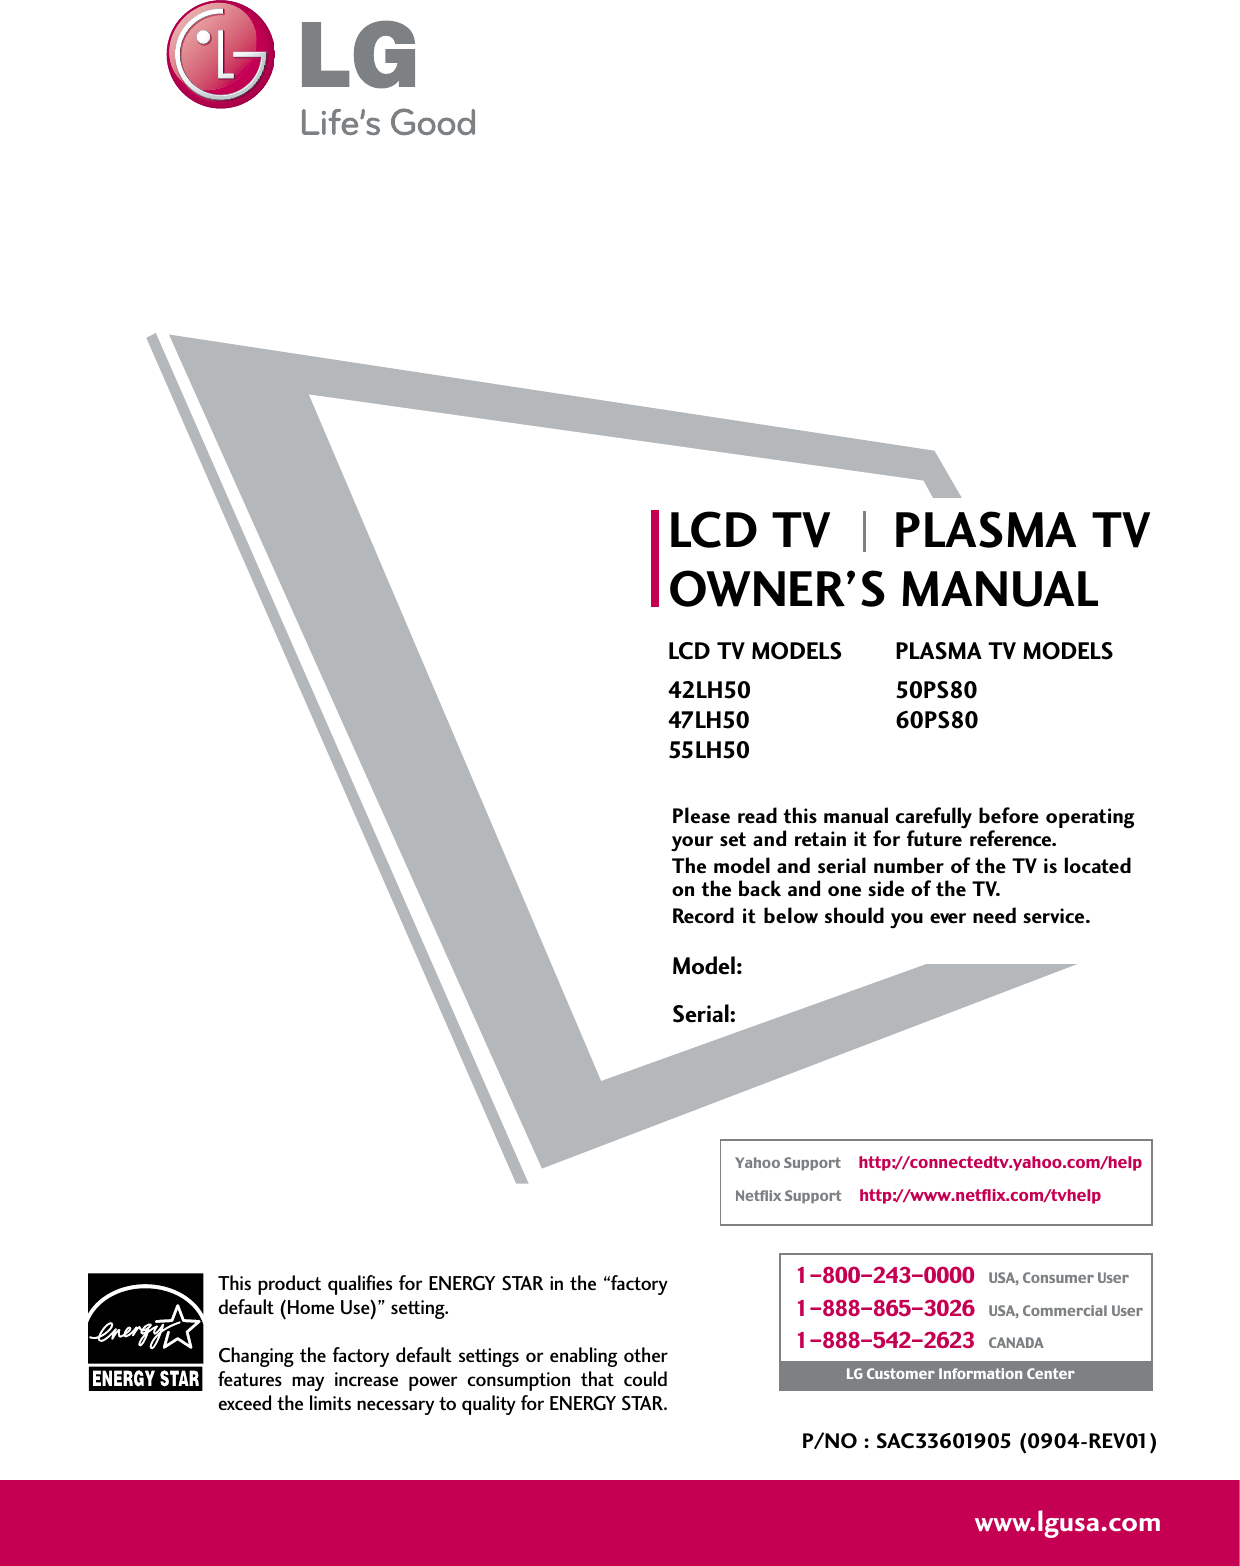 Please read this manual carefully before operatingyour set and retain it for future reference.The model and serial number of the TV is locatedon the back and one side of the TV. Record it below should you ever need service.P/NO : SAC33601905 (0904-REV01)www.lgusa.comThis product qualifies for ENERGY STAR in the “factorydefault (Home Use)” setting.Changing the factory default settings or enabling otherfeatures  may  increase  power  consumption  that  couldexceed the limits necessary to quality for ENERGY STAR.Model:Serial:1-800-243-0000   USA, Consumer User1-888-865-3026   USA, Commercial User1-888-542-2623   CANADALG Customer Information CenterYahoo Support     http://connectedtv.yahoo.com/helpNetflix Support     http://www.netflix.com/tvhelpLCD TV PLASMA TVOWNER’S MANUALLCD TV MODELS42LH5047LH5055LH50PLASMA TV MODELS50PS8060PS80